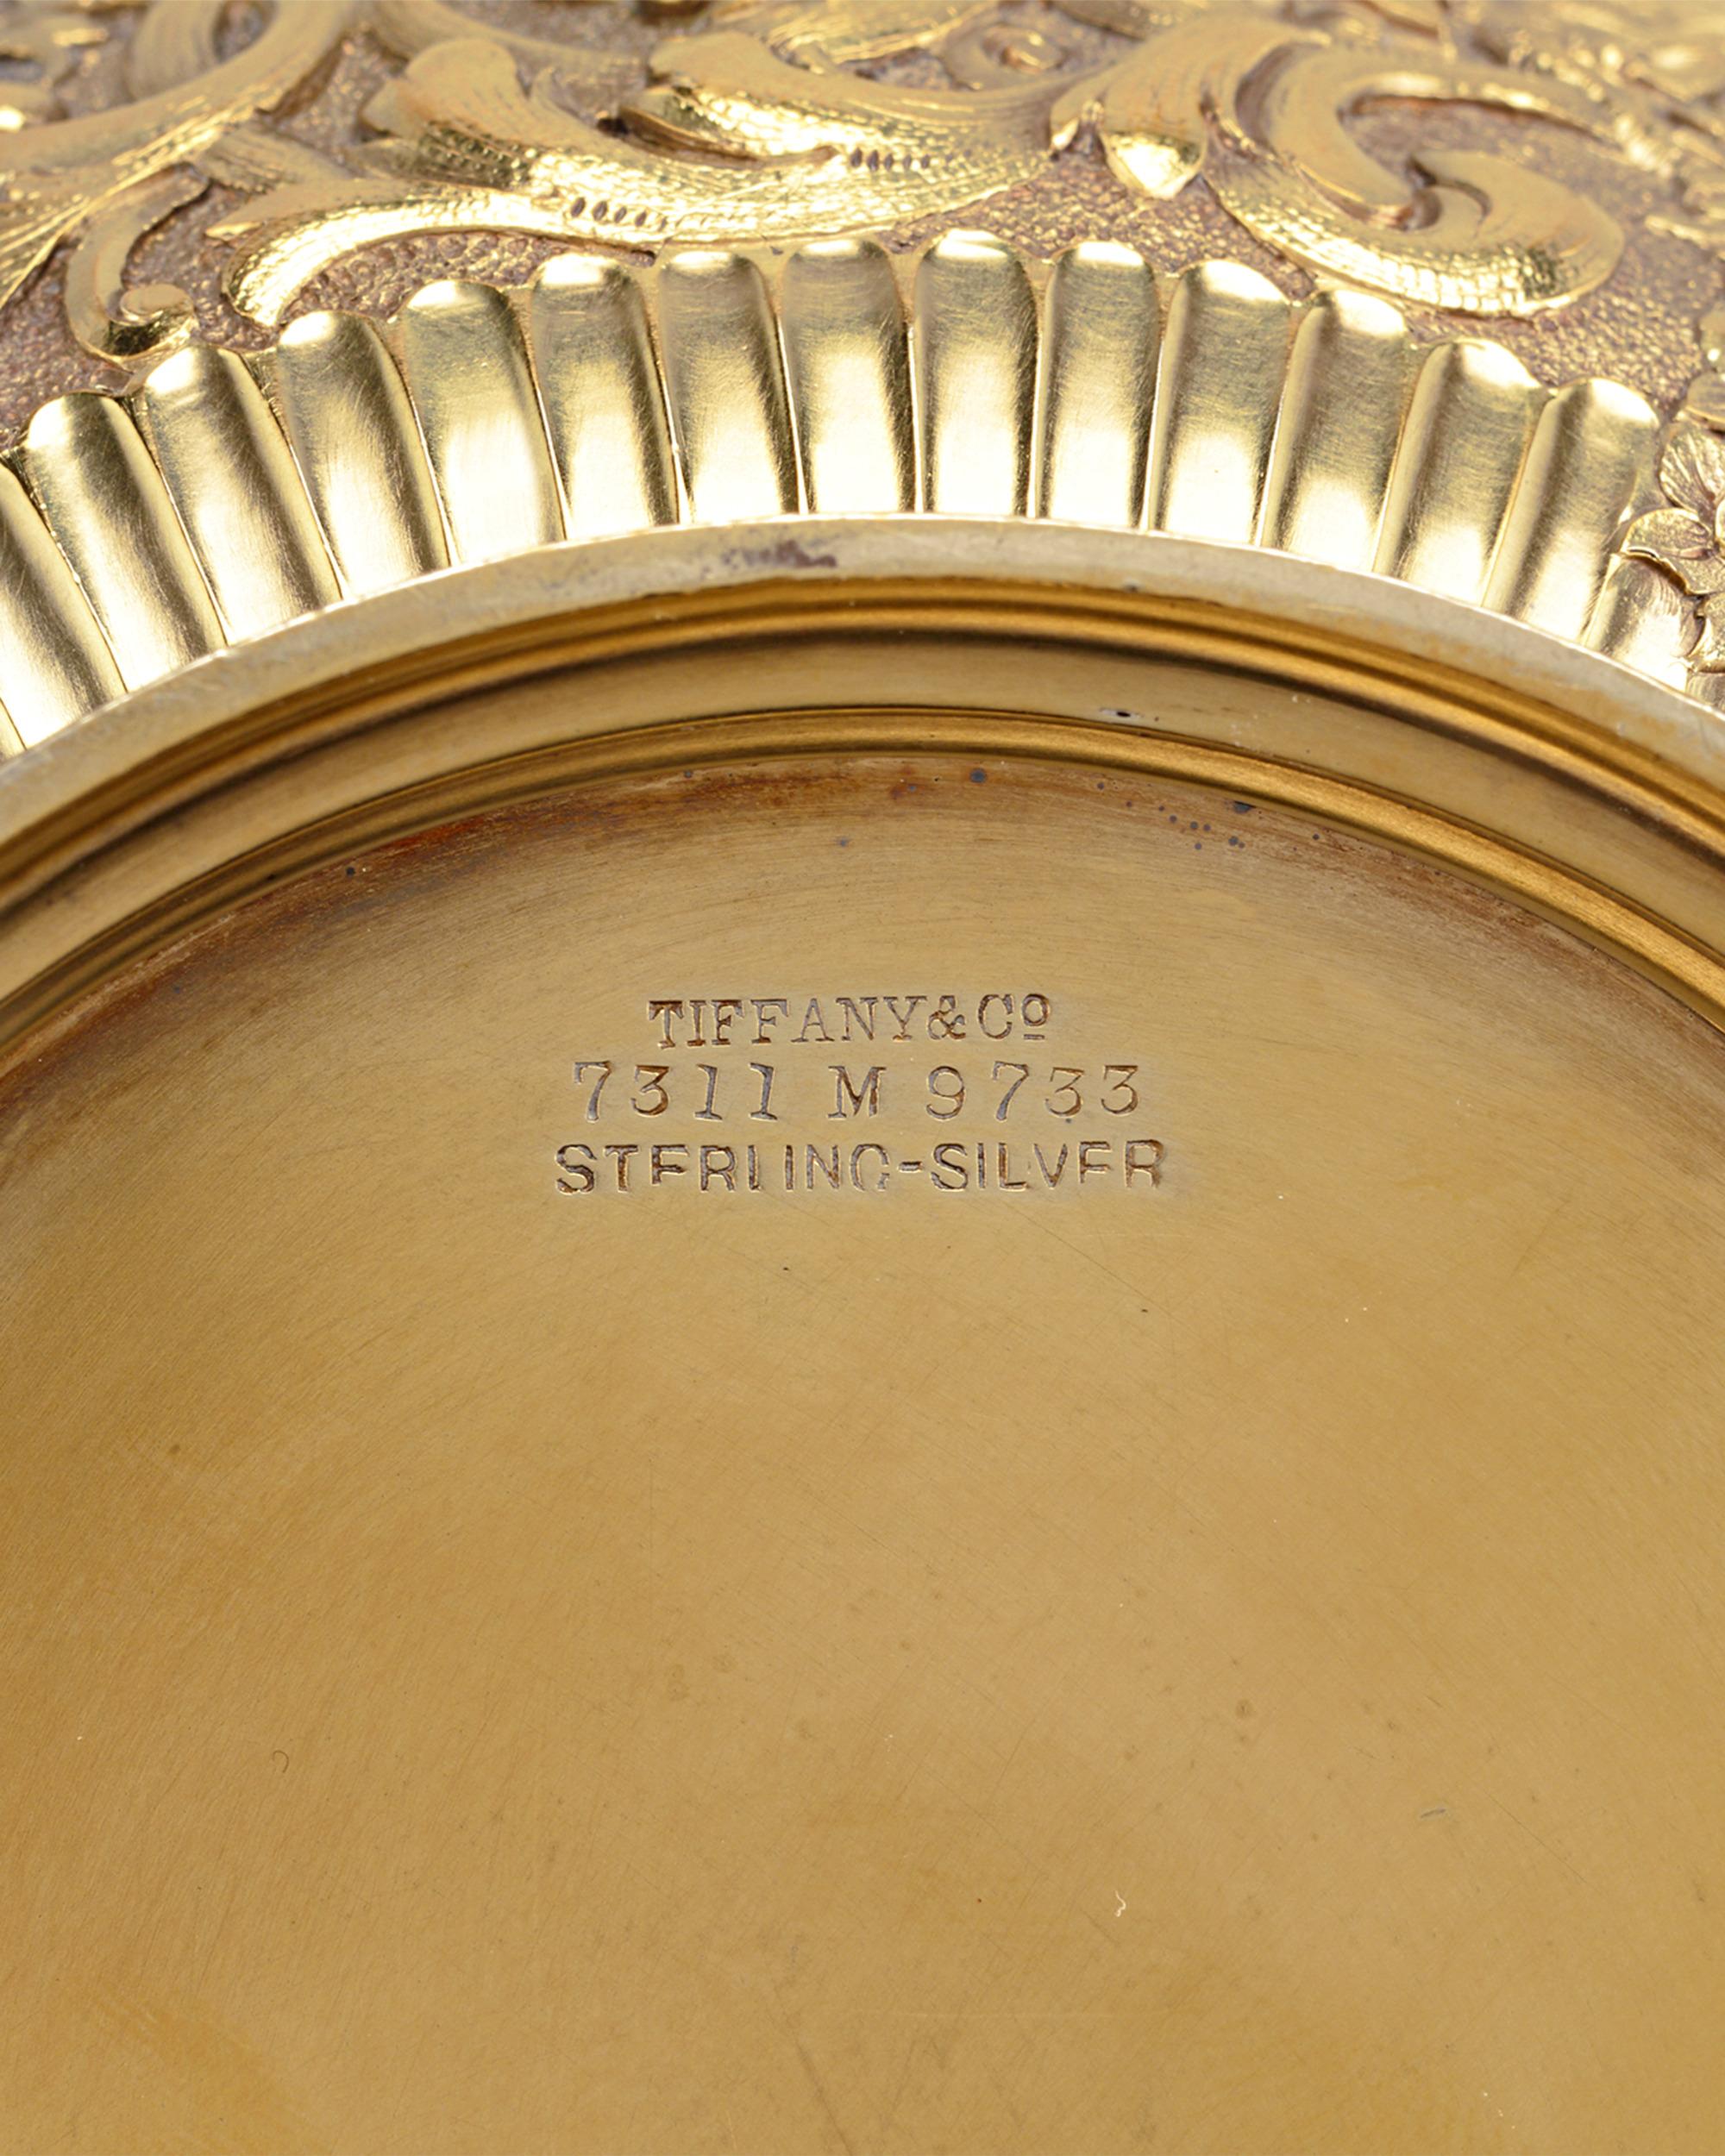 American Tiffany & Co. Silver-Gilt Finger Bowls For Sale